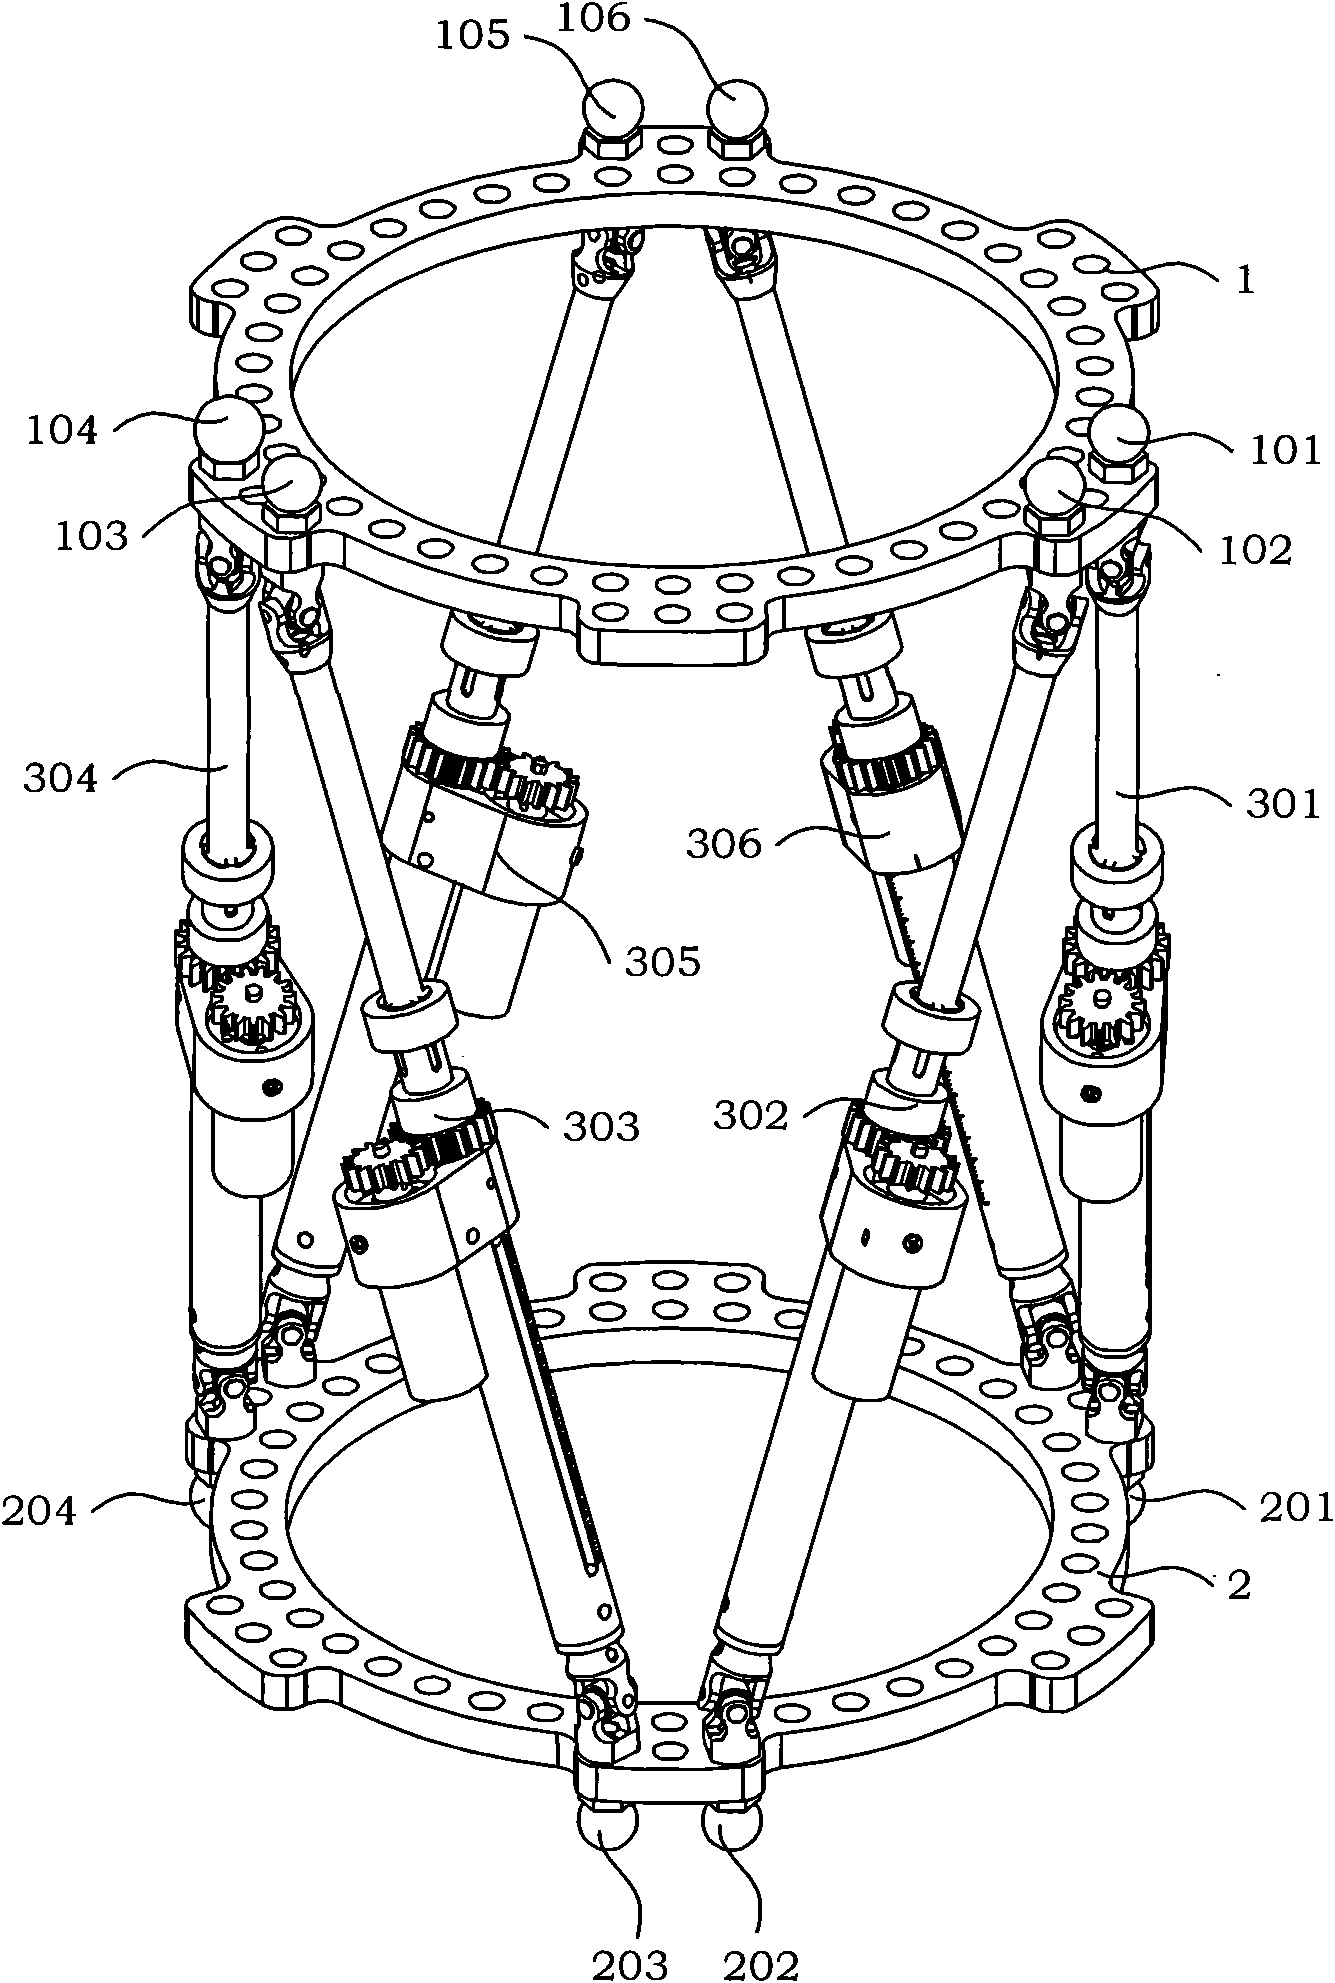 Virtual and real resetting registration method of long bone based on six-degree-of-freedom parallel connection mechanism